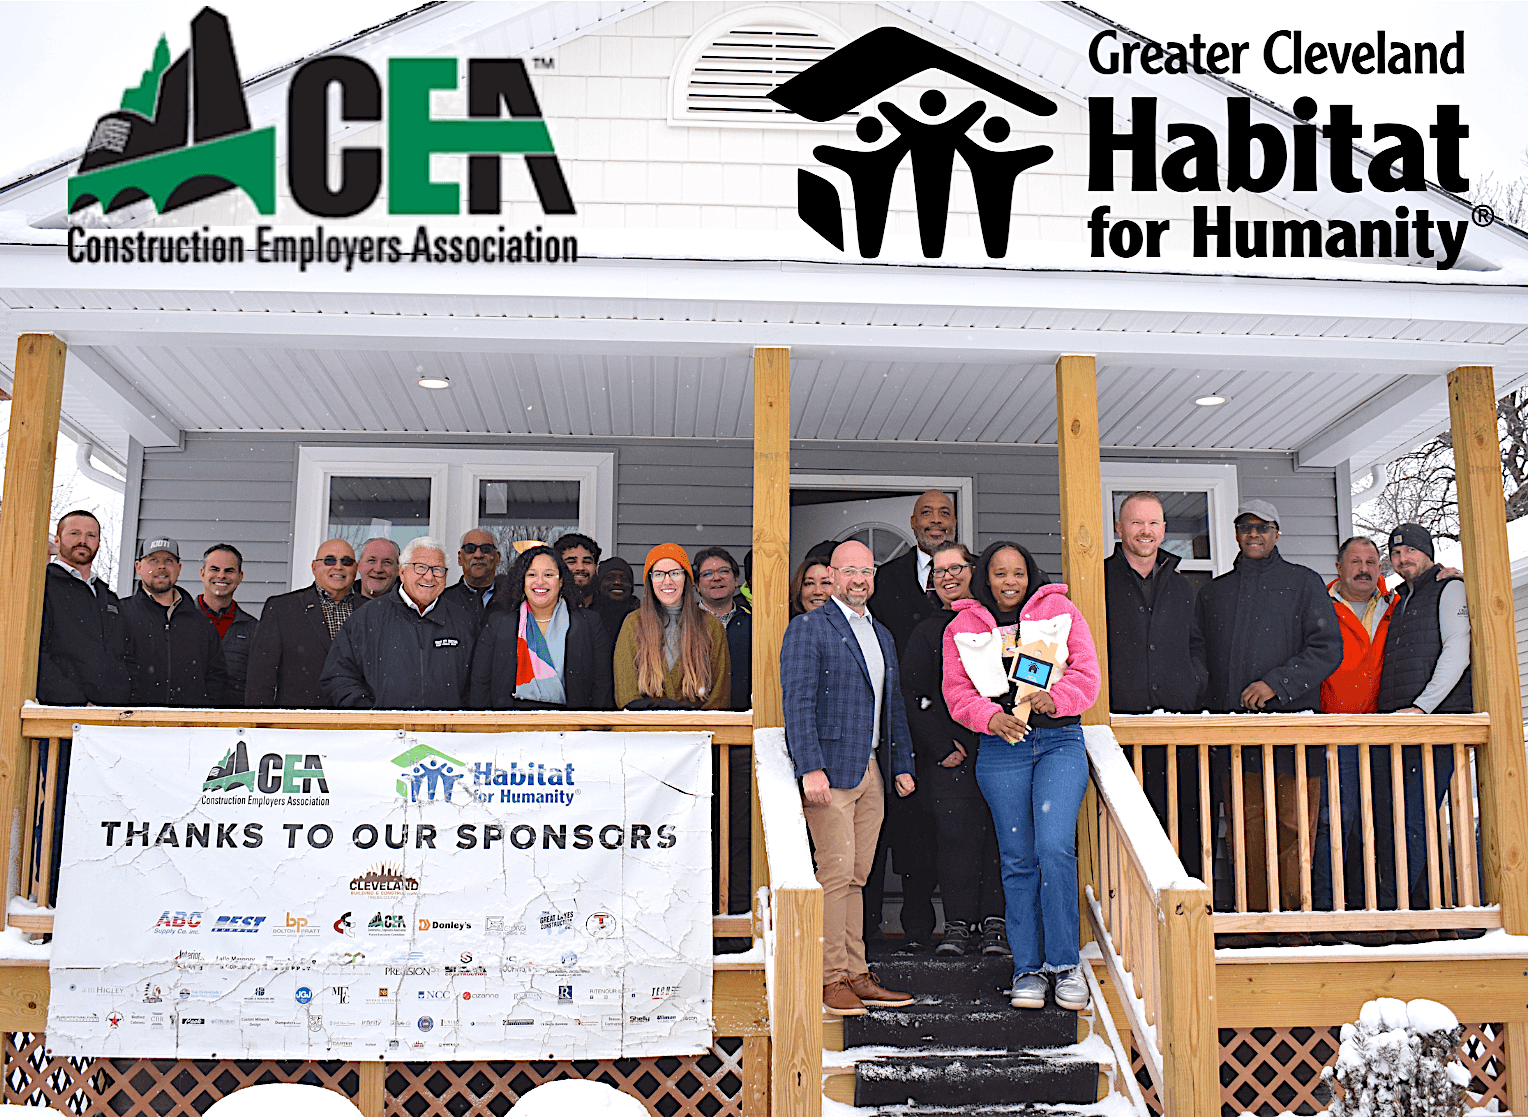 Habitat partners with Consumer Employers Association to dedicate home to deserving family